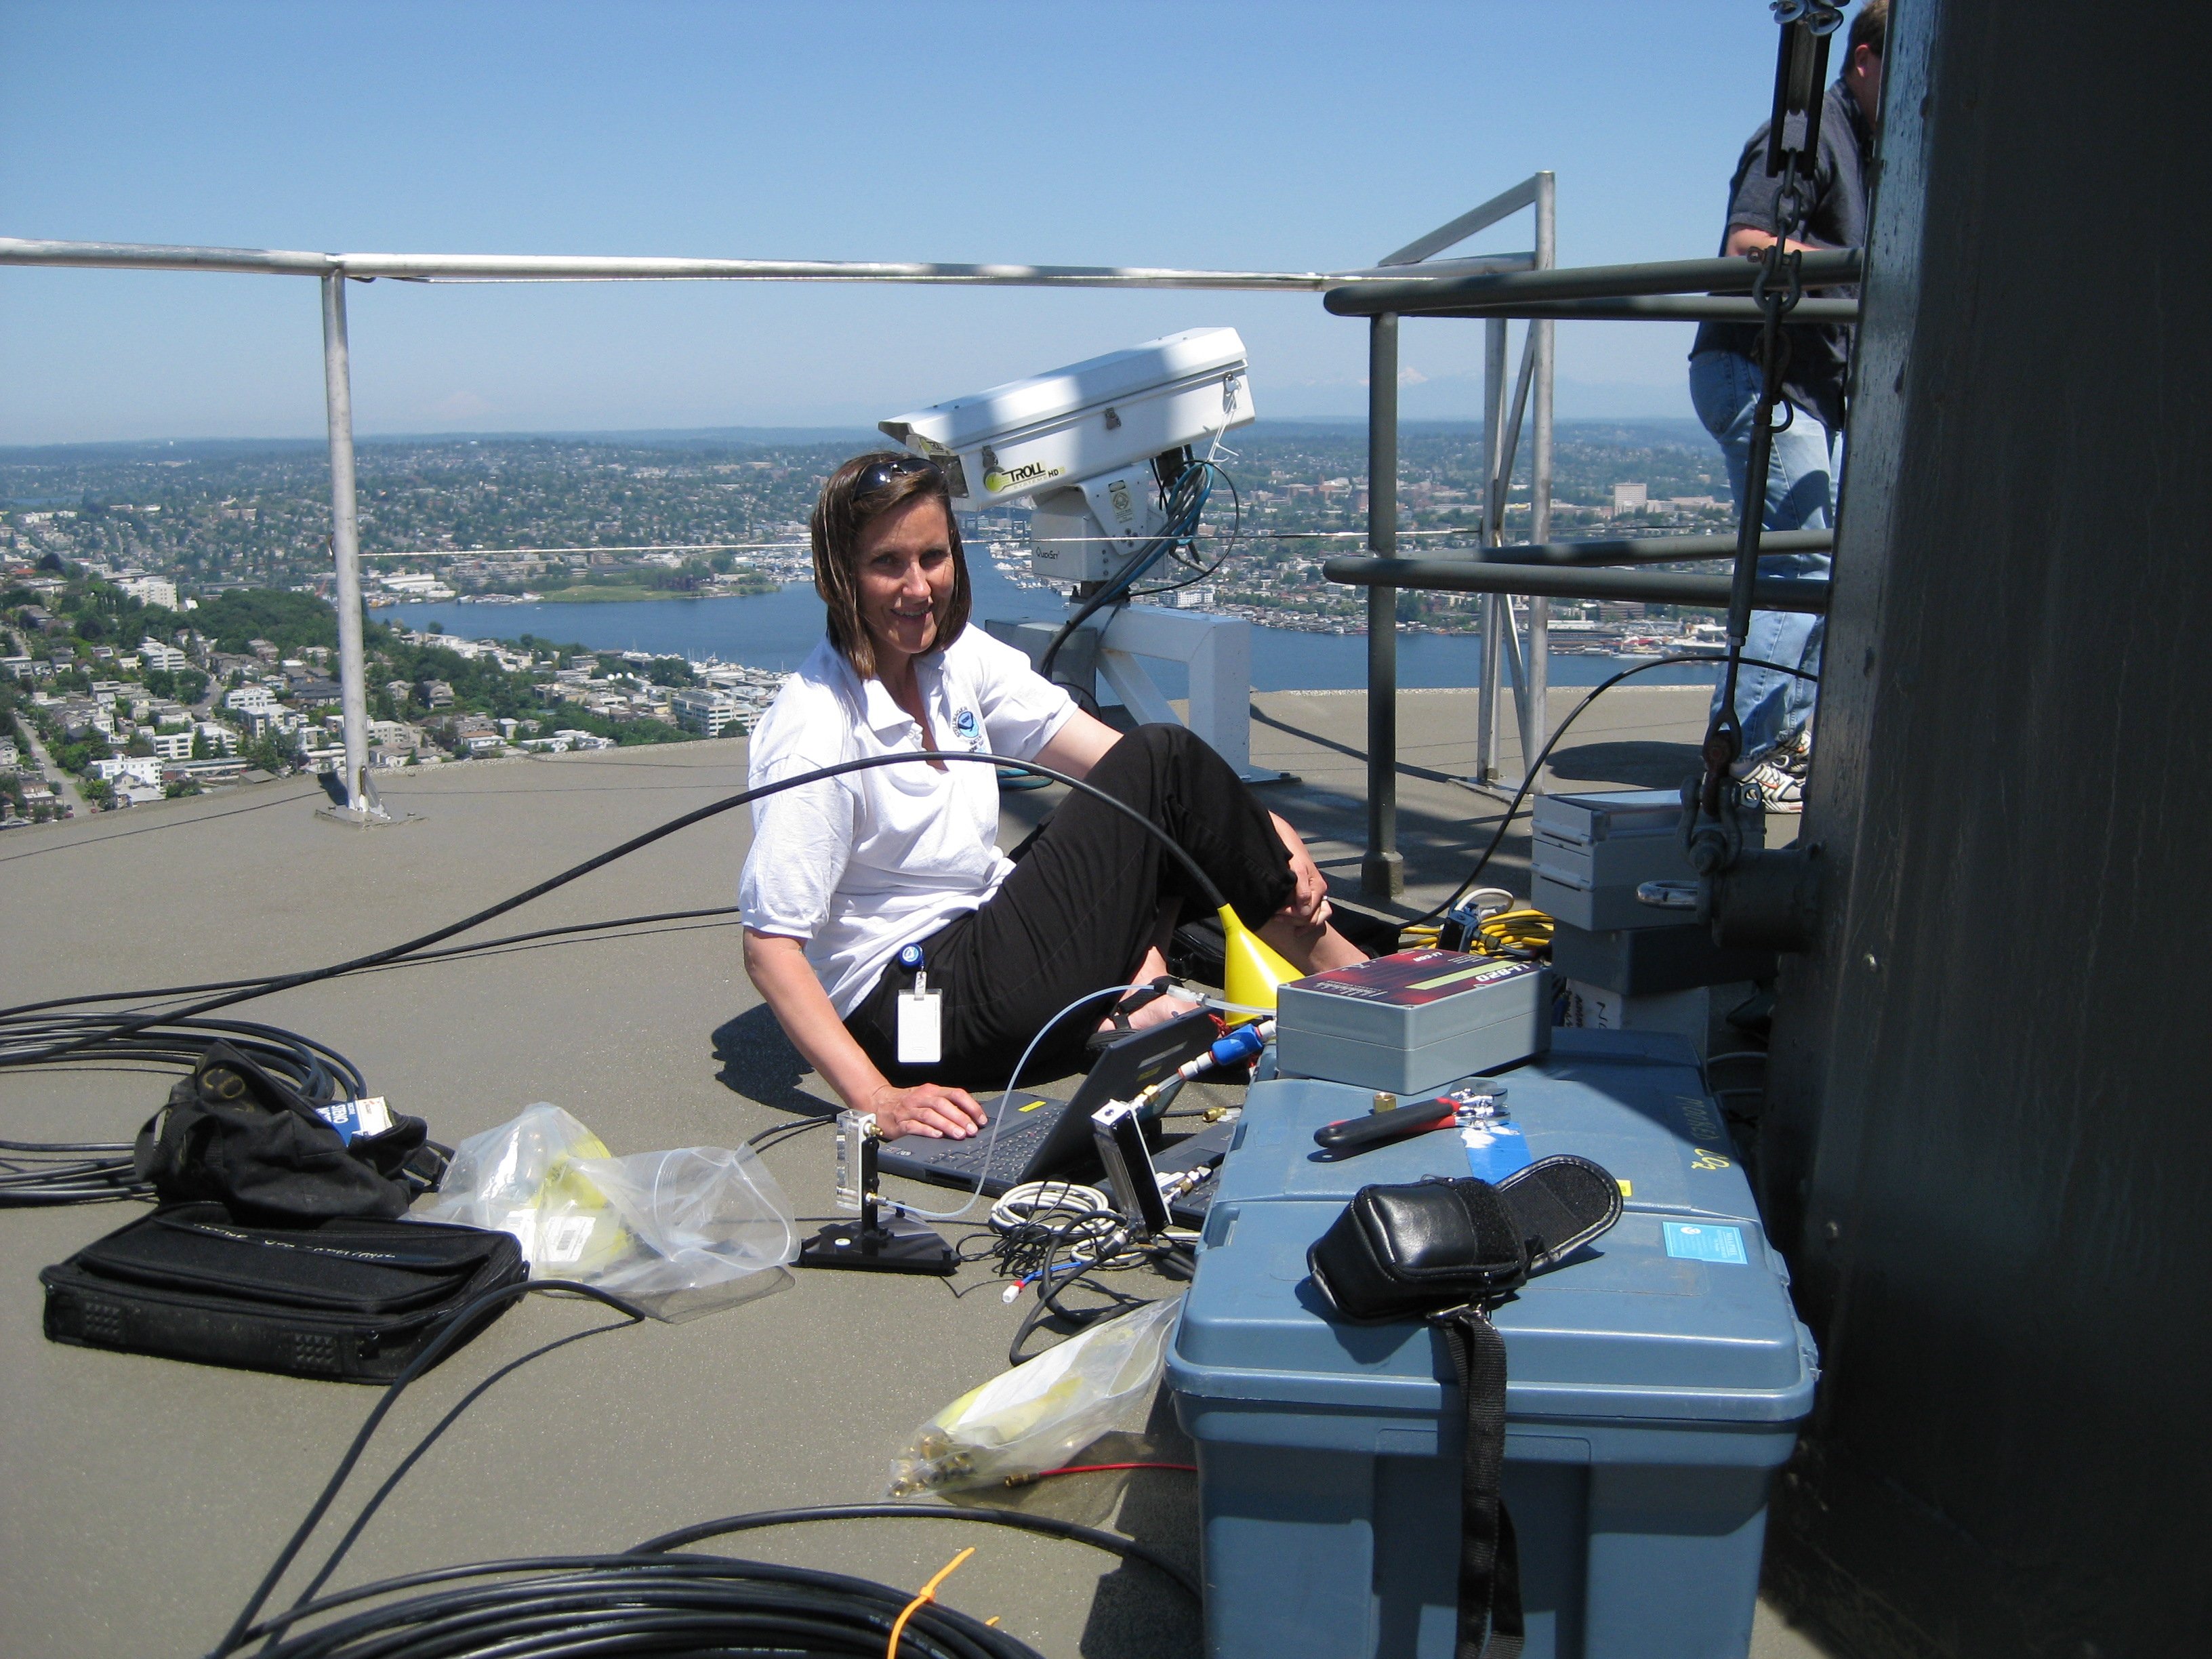 NOAA scientist Stacy Maenner working on the CO2 sensor installed on top of Seattle’s Space Needle.